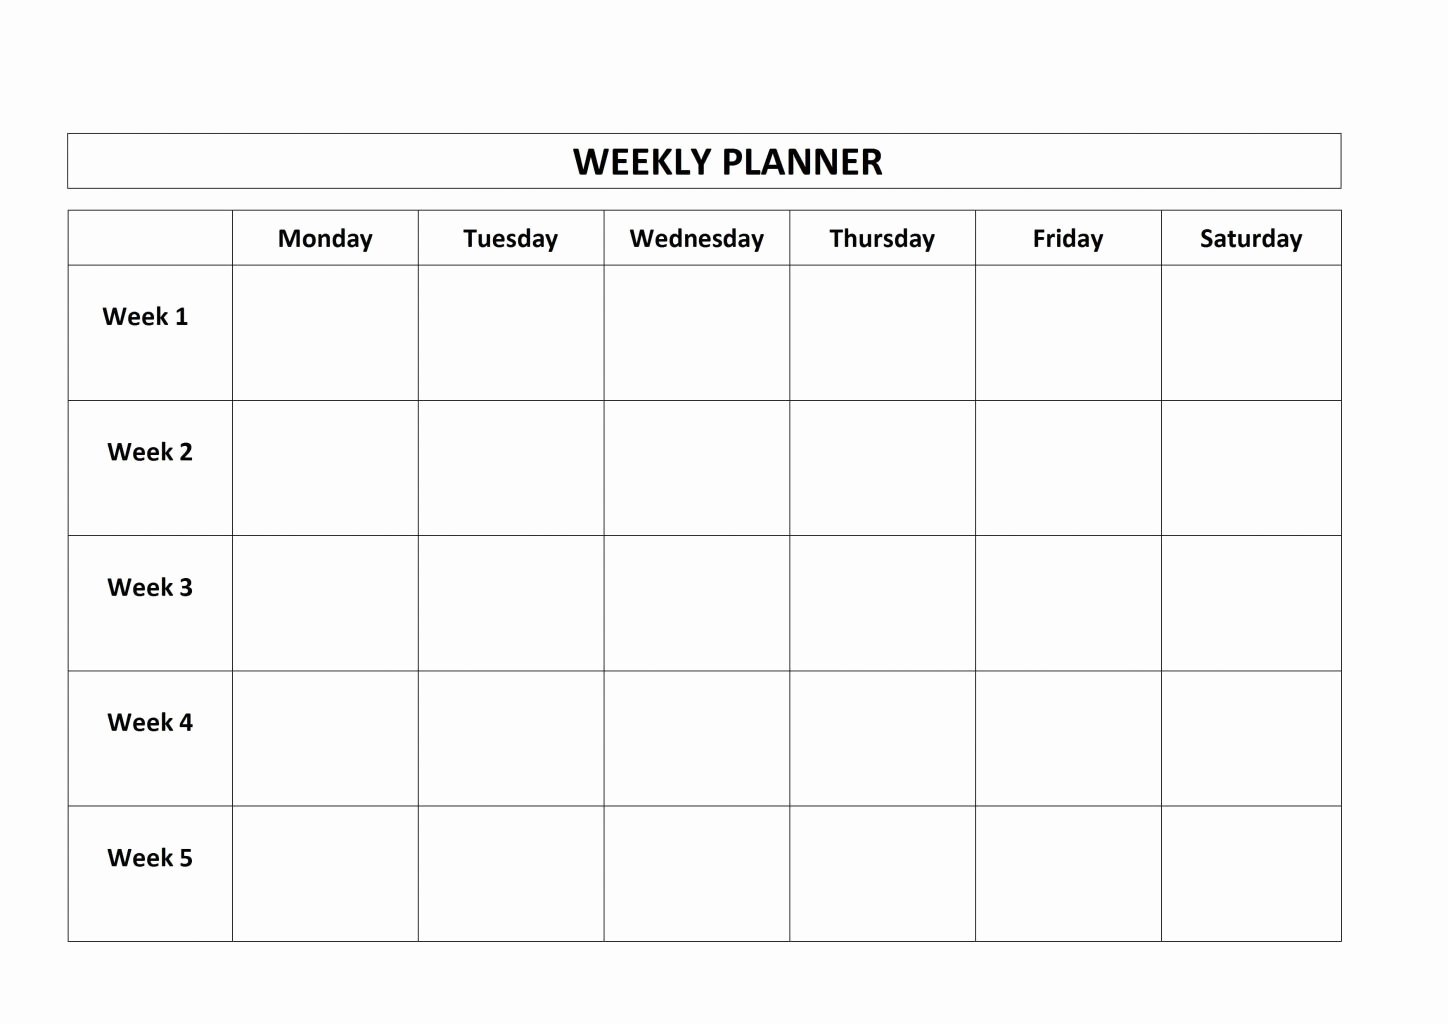 Monday to Friday Schedule Template Beautiful Monday Through Friday Schedule Template Free